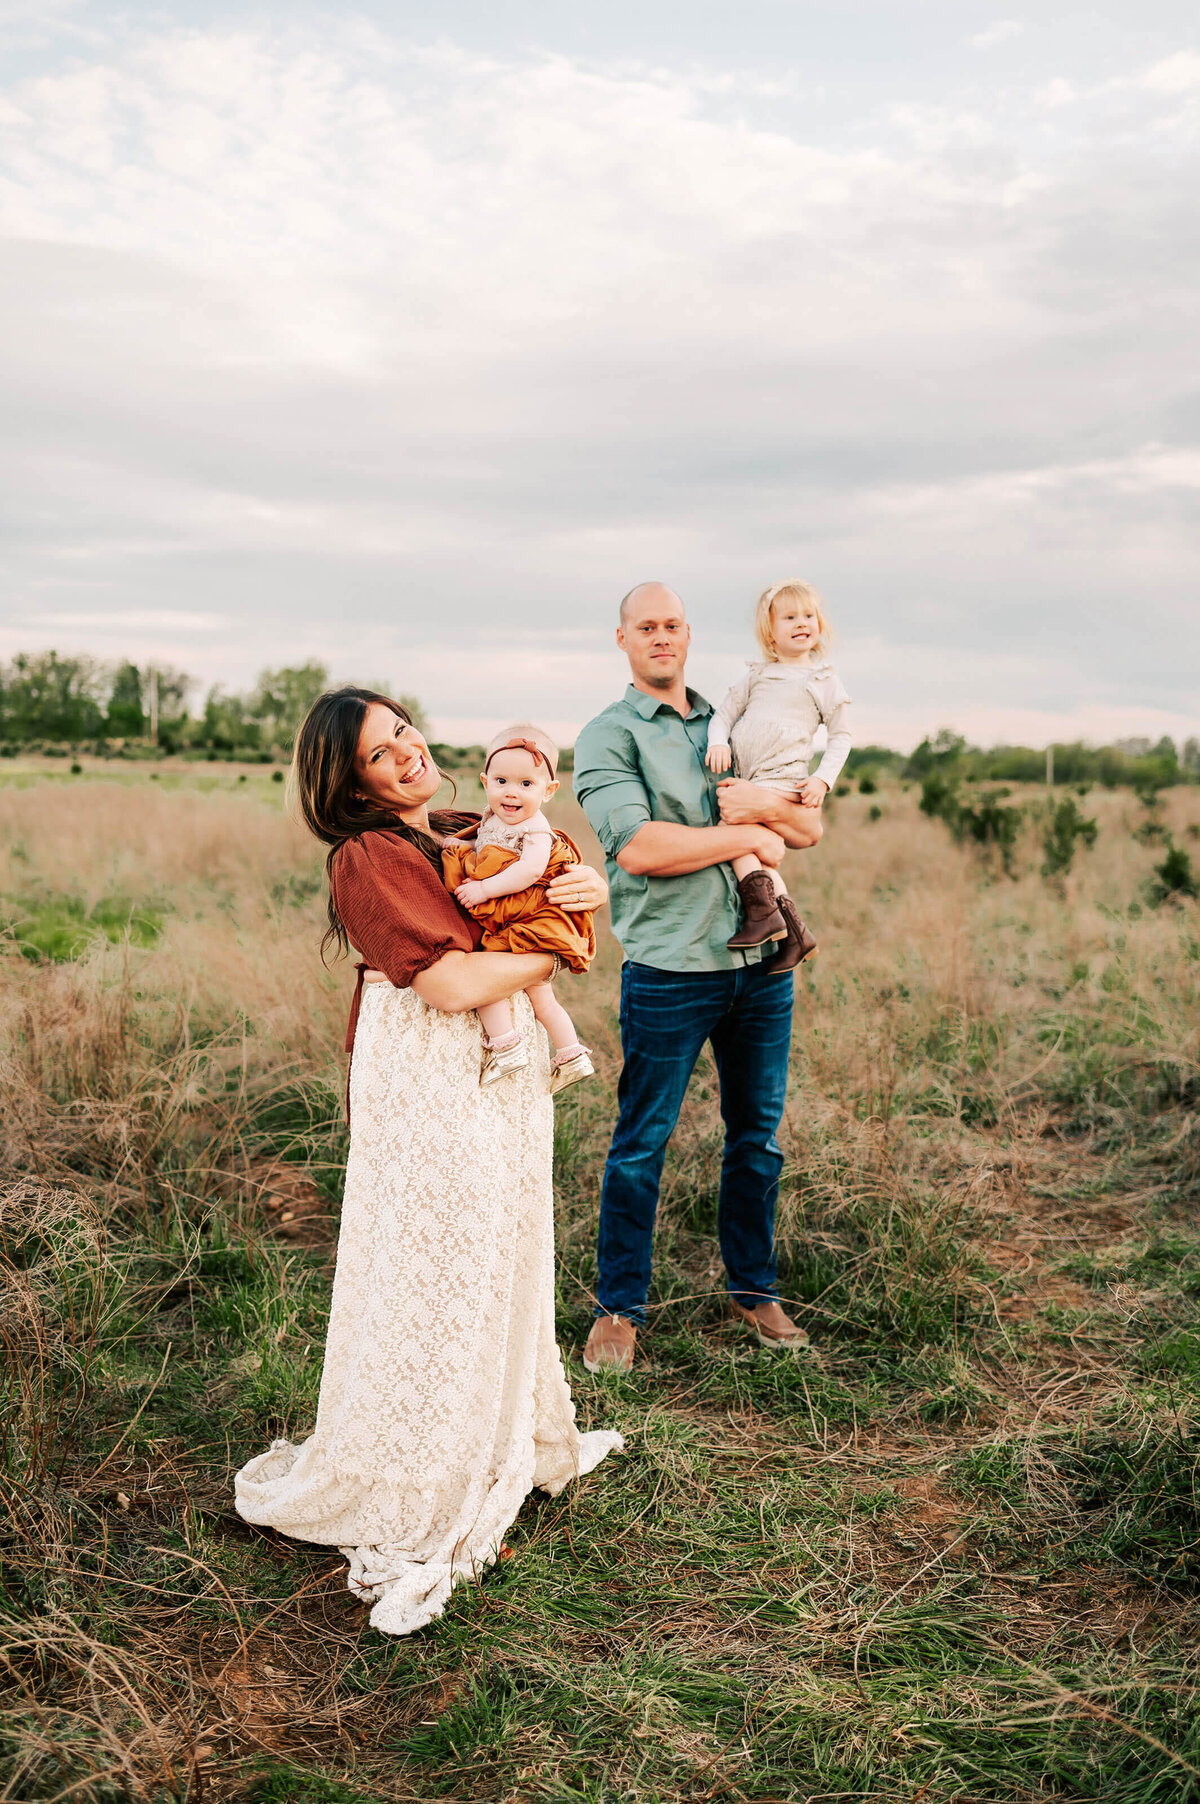 Springfield MO family photographer Jessica Kennedy of The XO Photography captures family cuddling kids at sunset